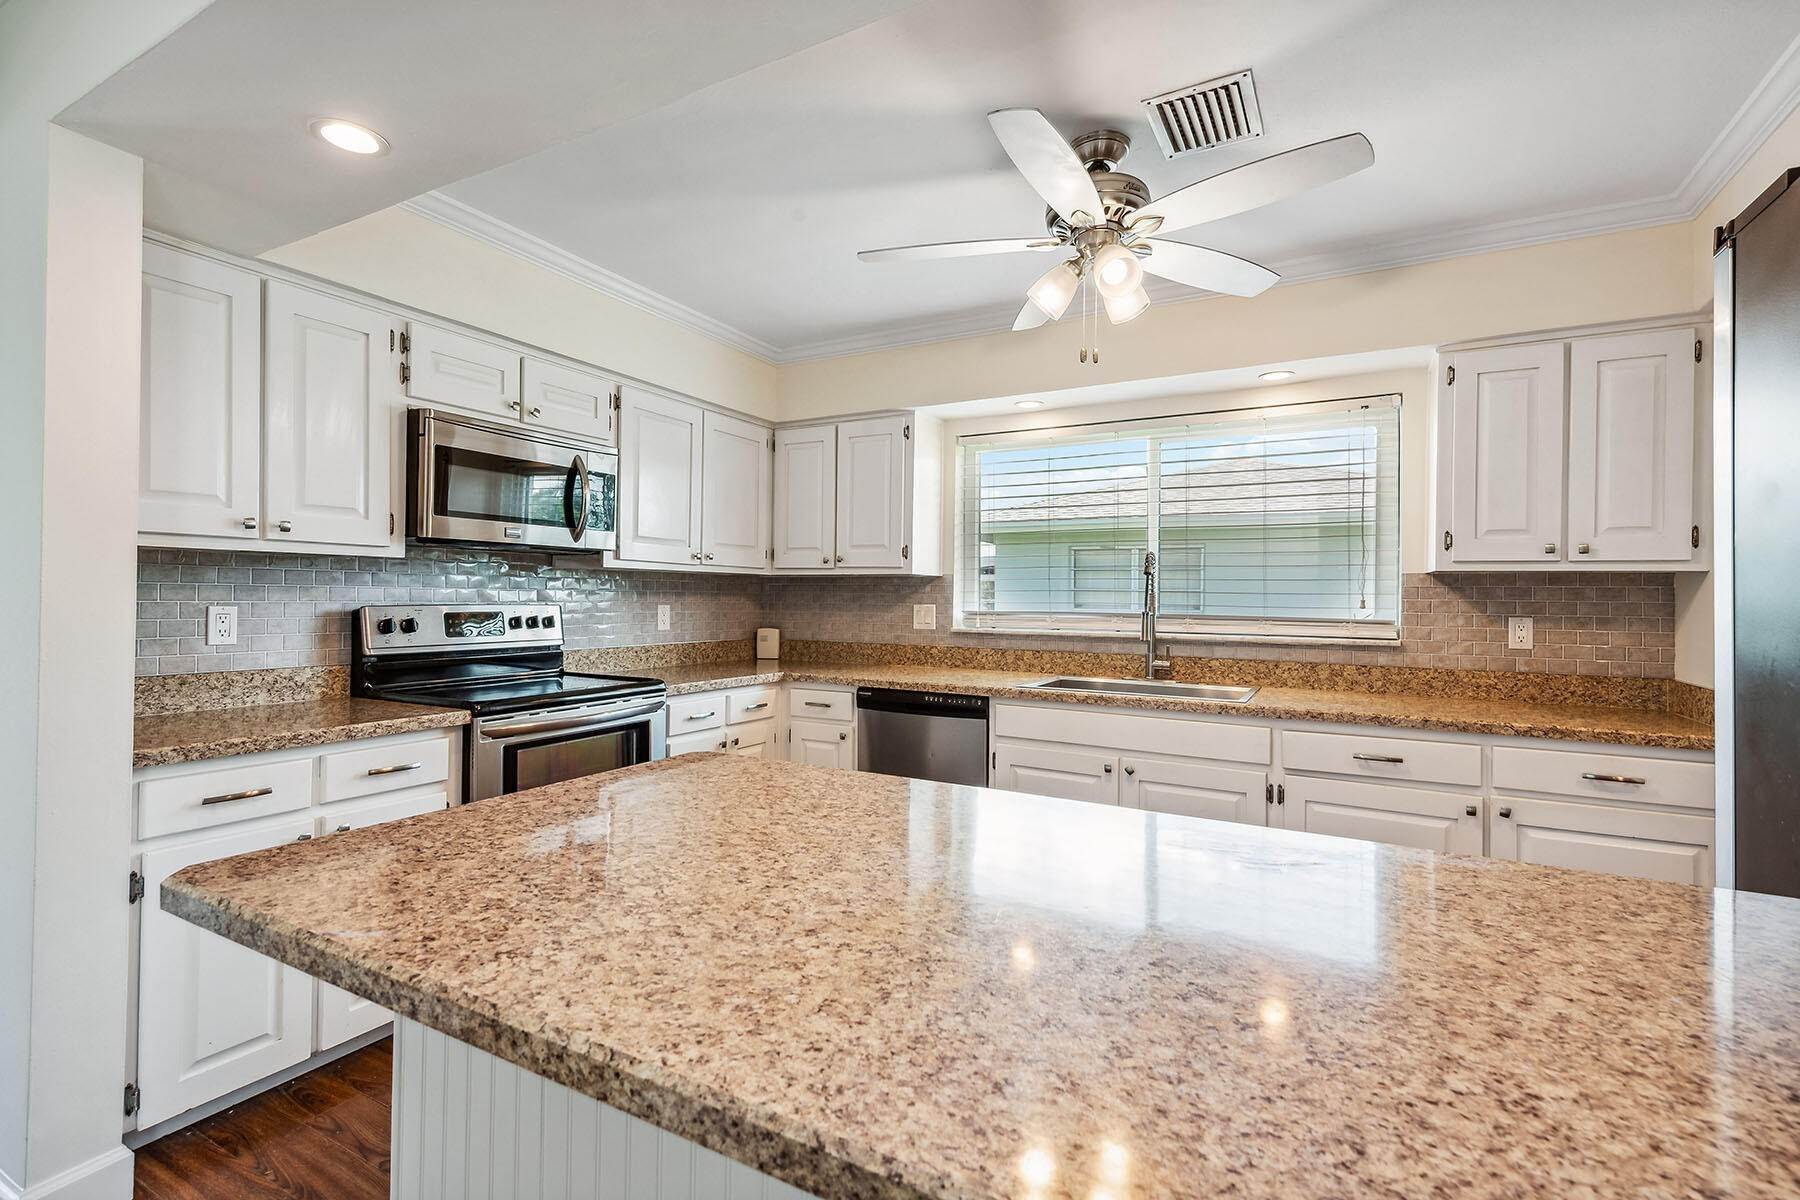 6. Single Family for Sale at Marco Island, FL 34145